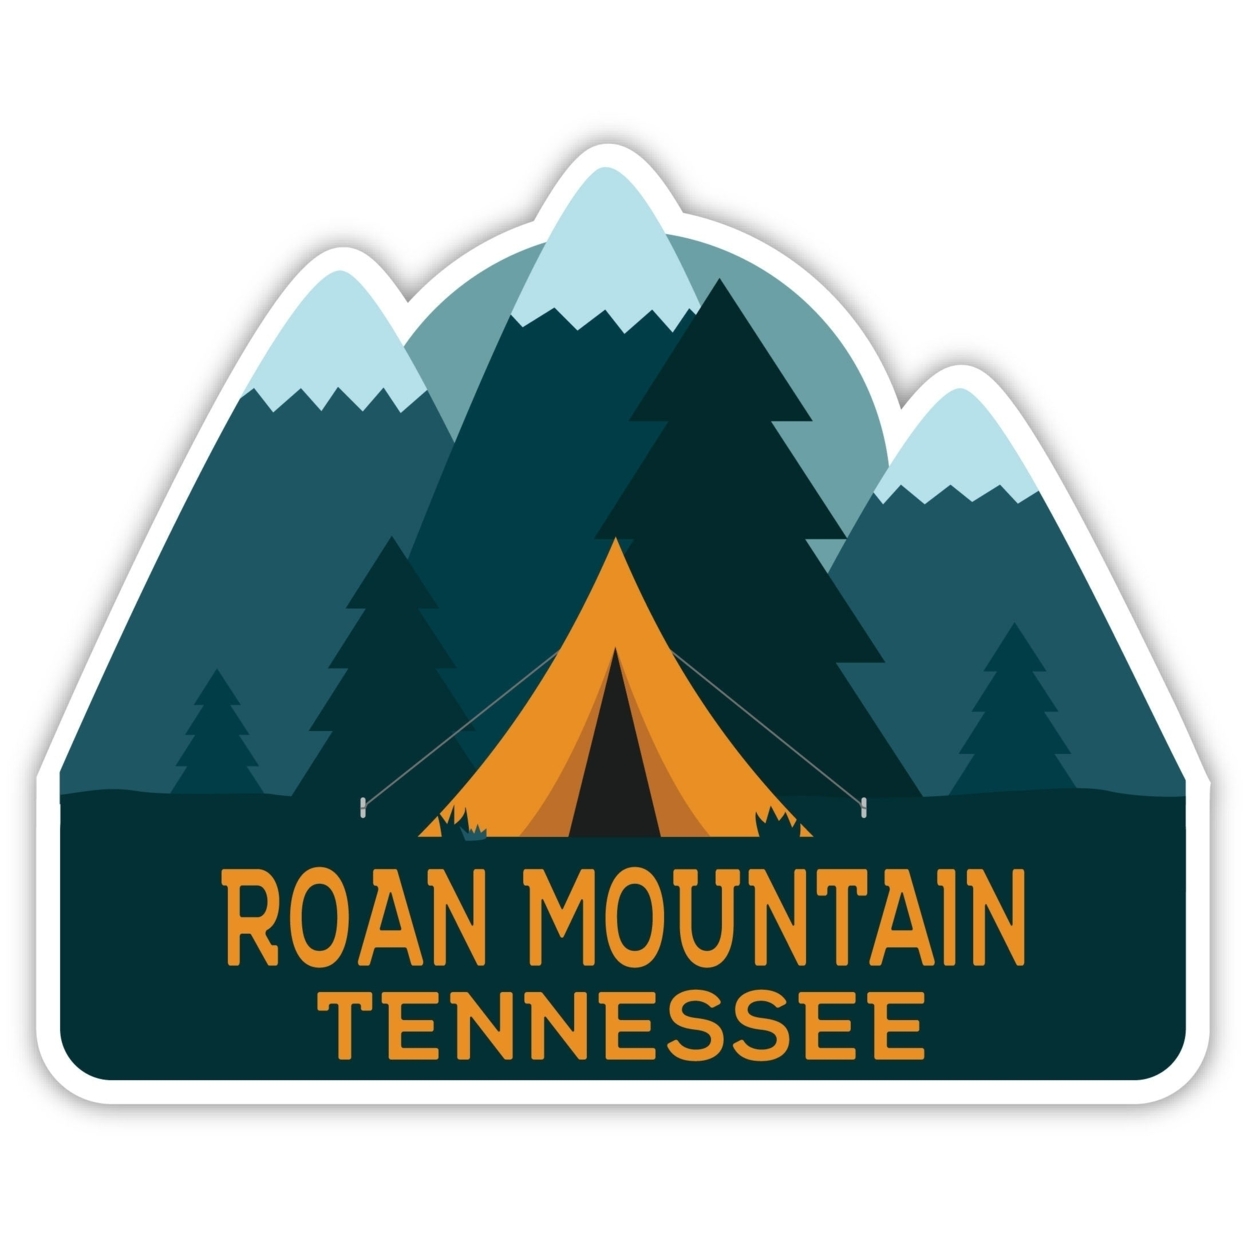 Roan Mountain Tennessee Souvenir Decorative Stickers (Choose Theme And Size) - Single Unit, 2-Inch, Great Outdoors